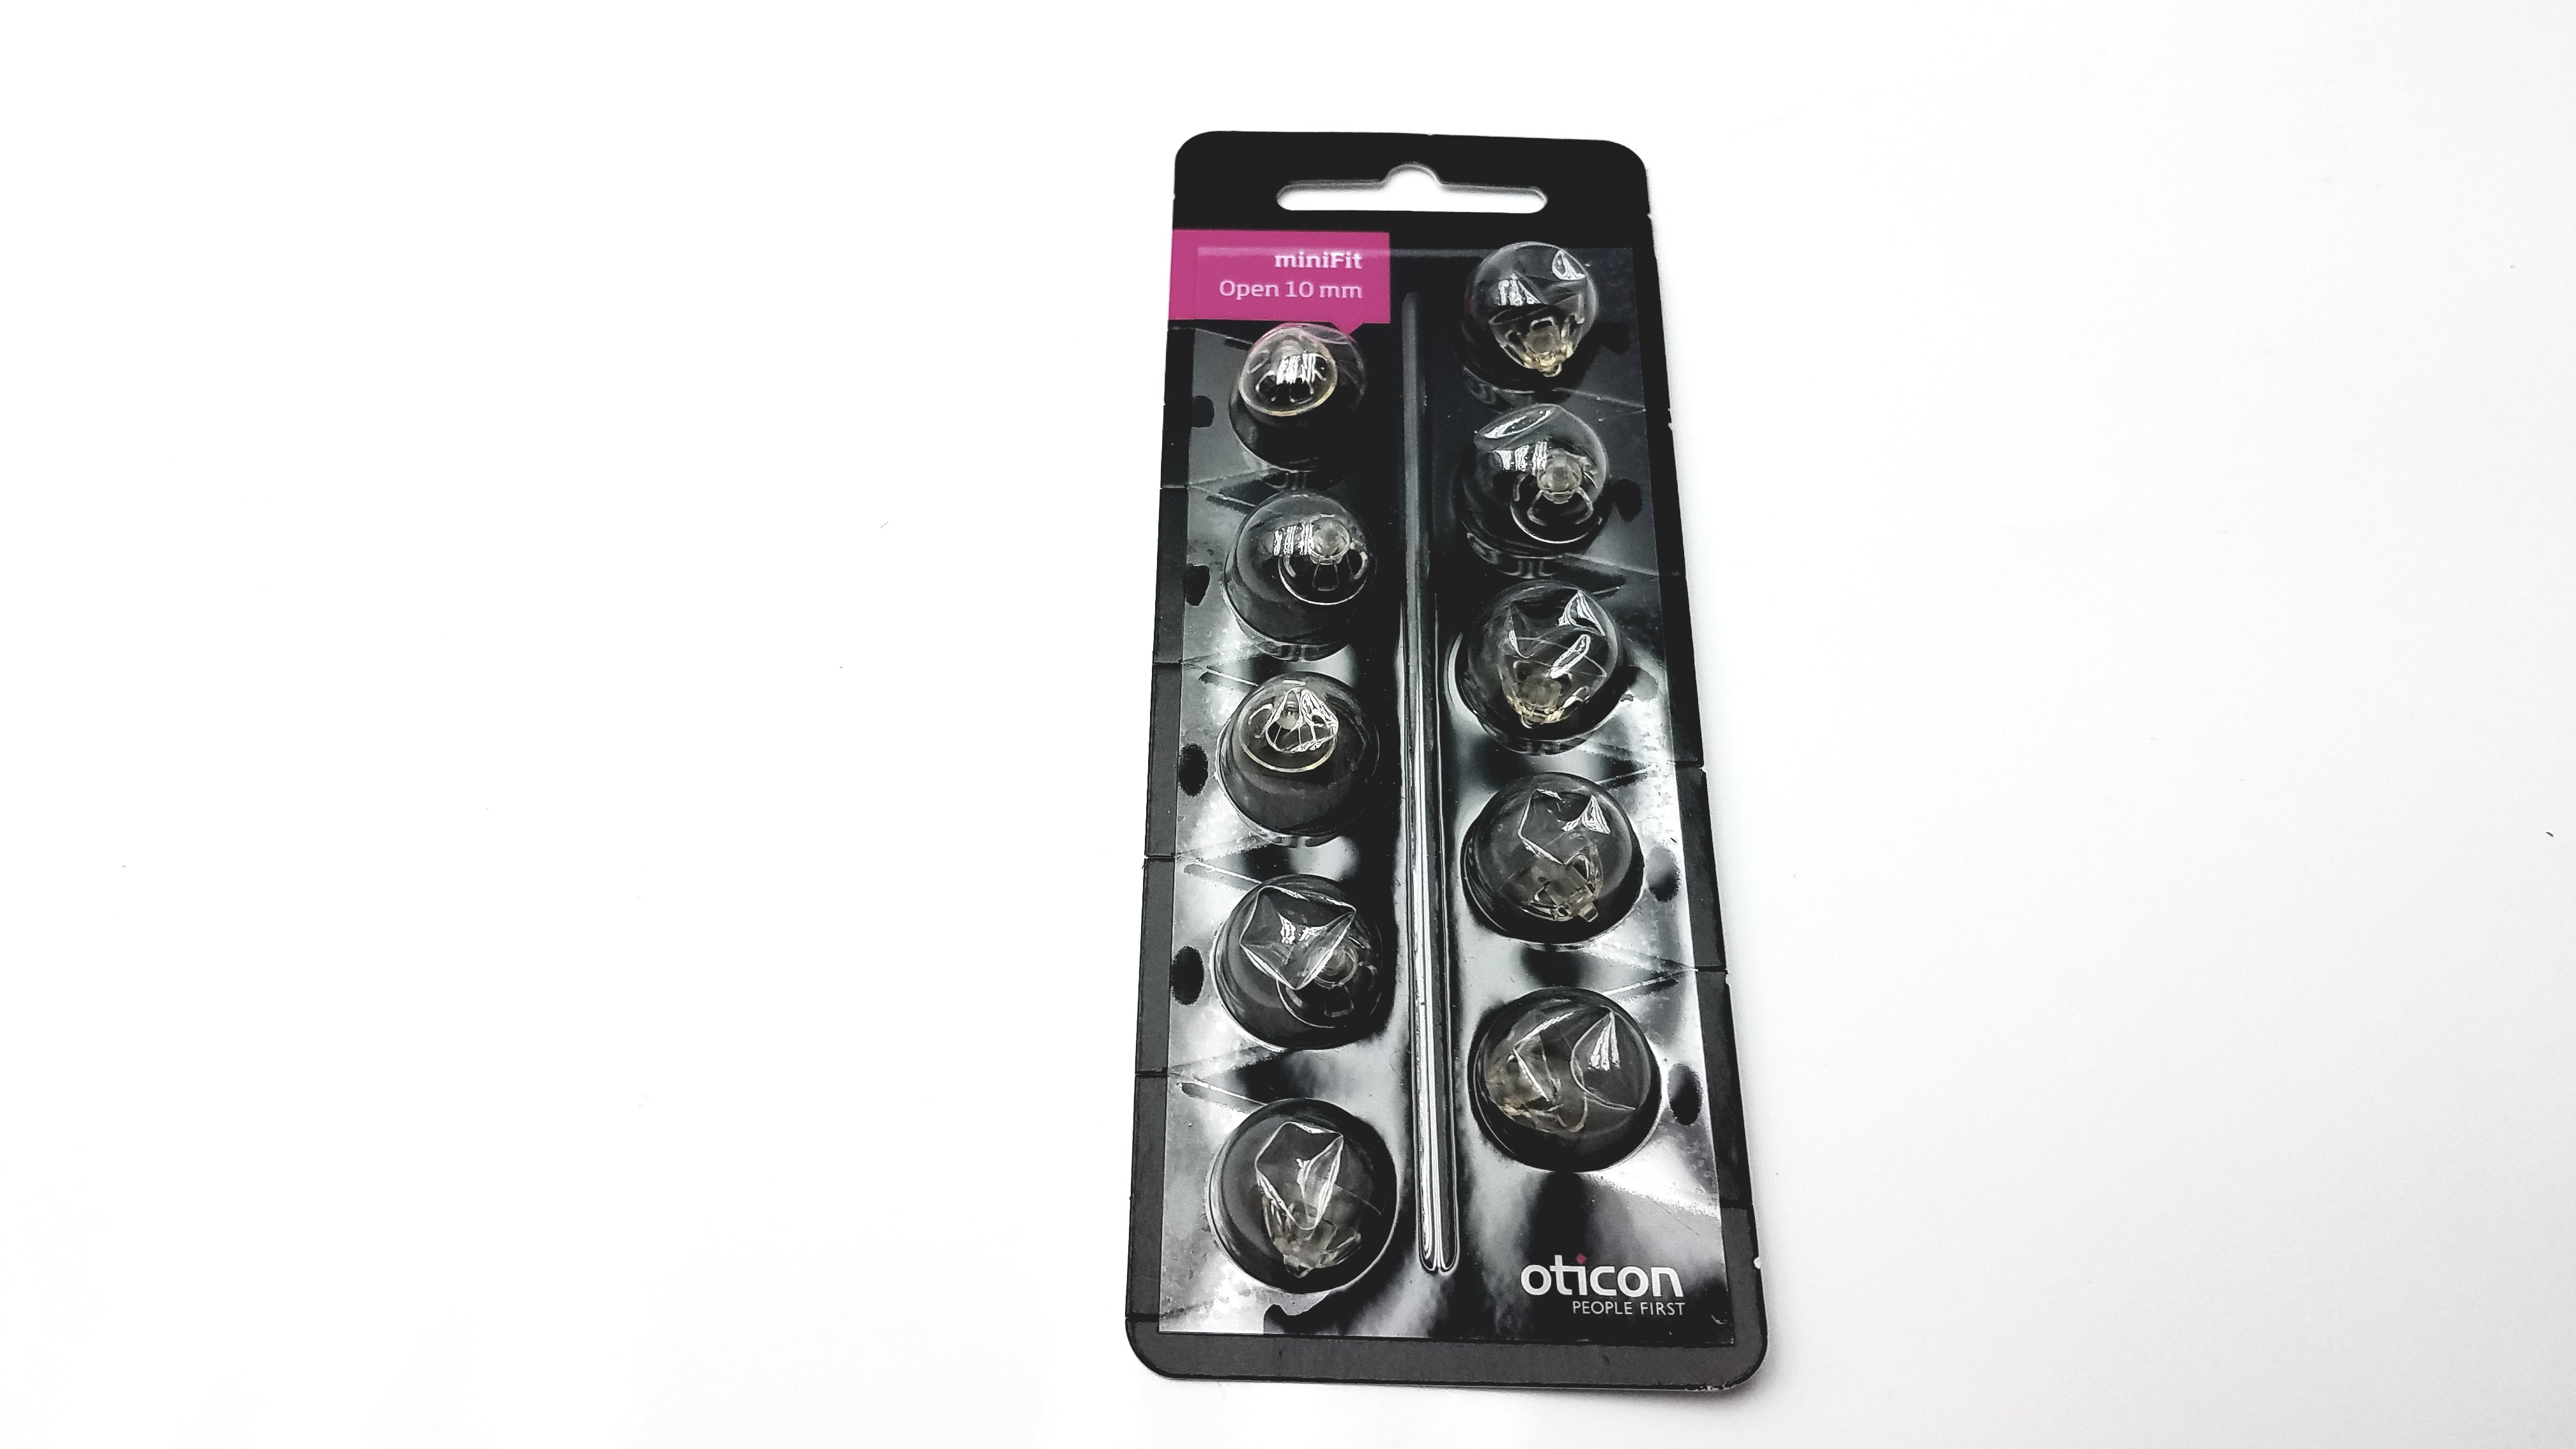 Load image into Gallery viewer, 1 Pack miniFit 10mm Open Domes For Oticon Hearing Aids. 10 Domes